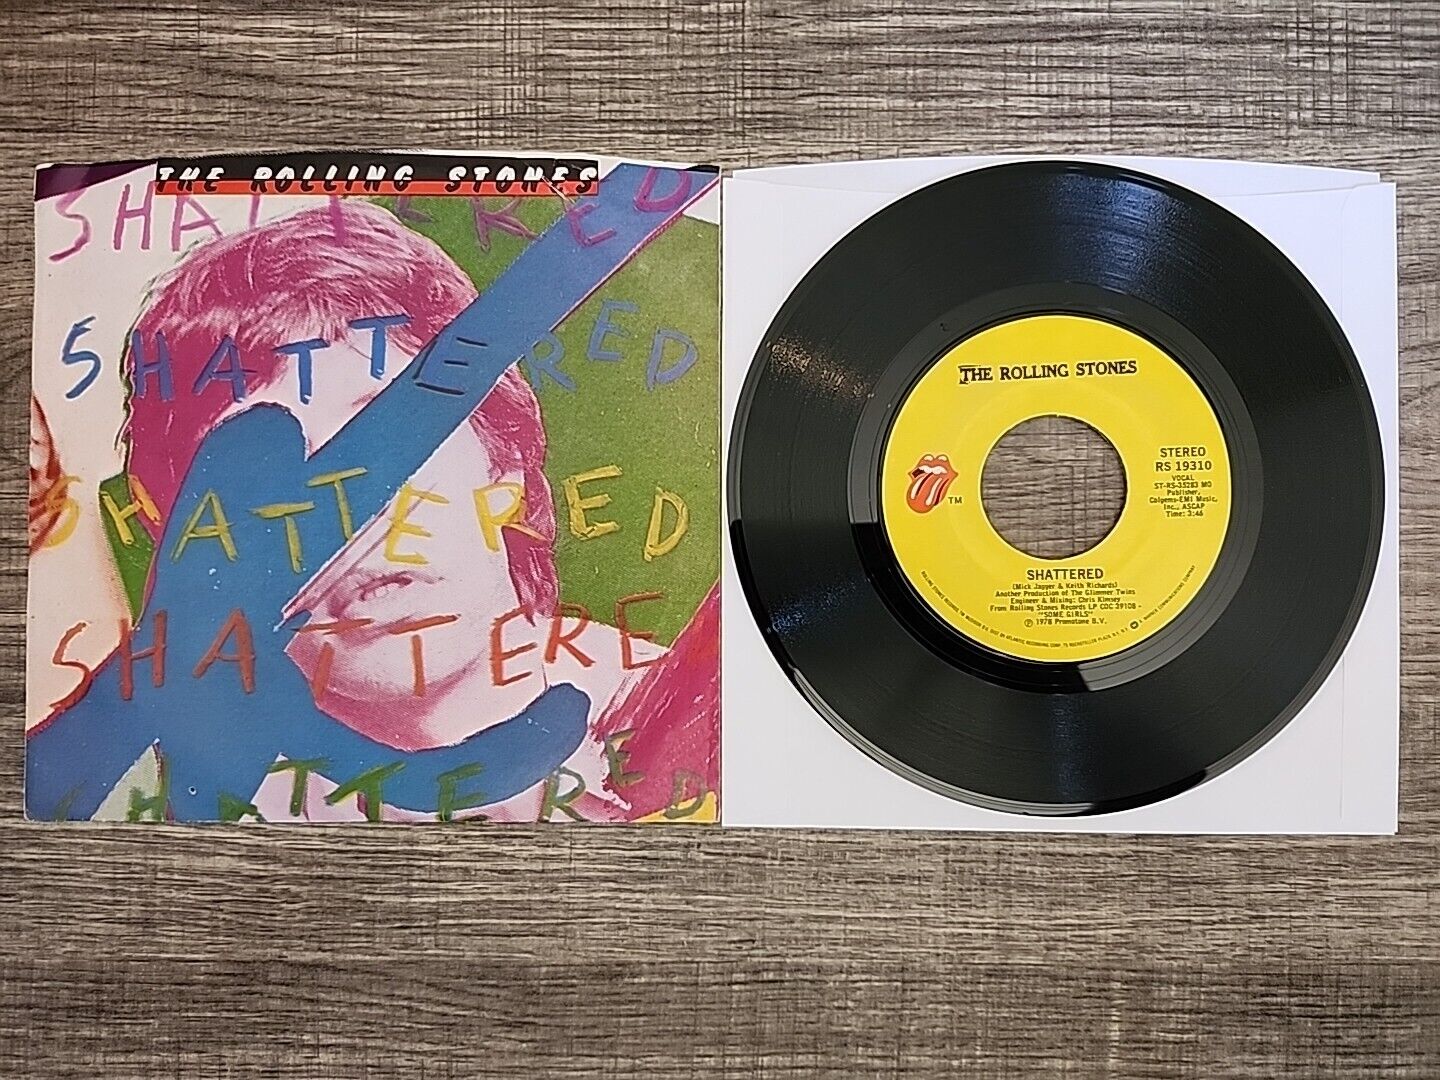 The Rolling Stones Shattered/Everything Is Turning To Gold 7" 45 RPM RS-19310